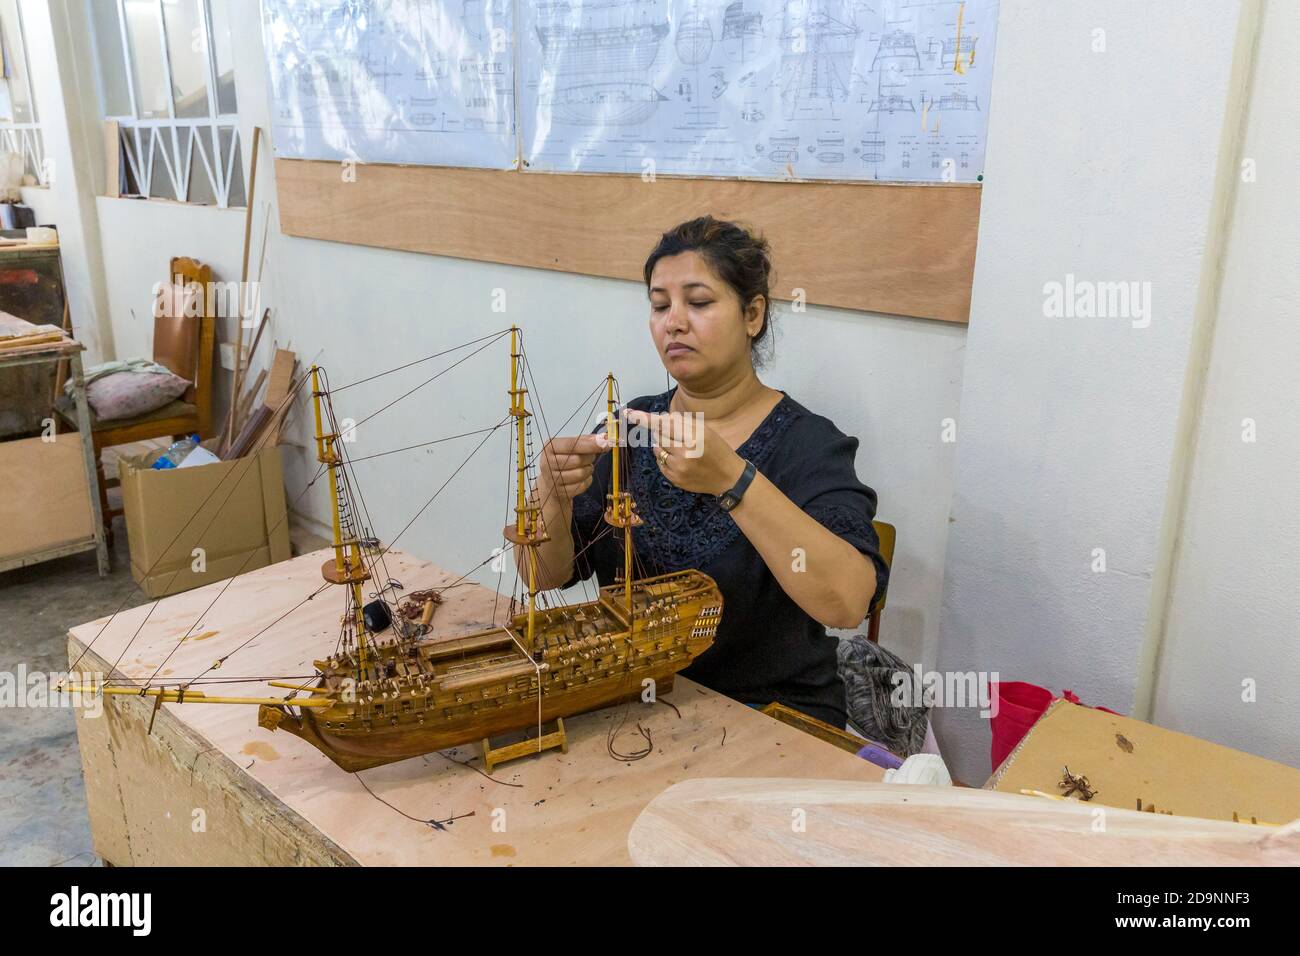 Manufacture of ship models, Voiliers de l'Océan, (Ship Models), Curepipe, Mauritius, Africa, Indian Ocean Stock Photo